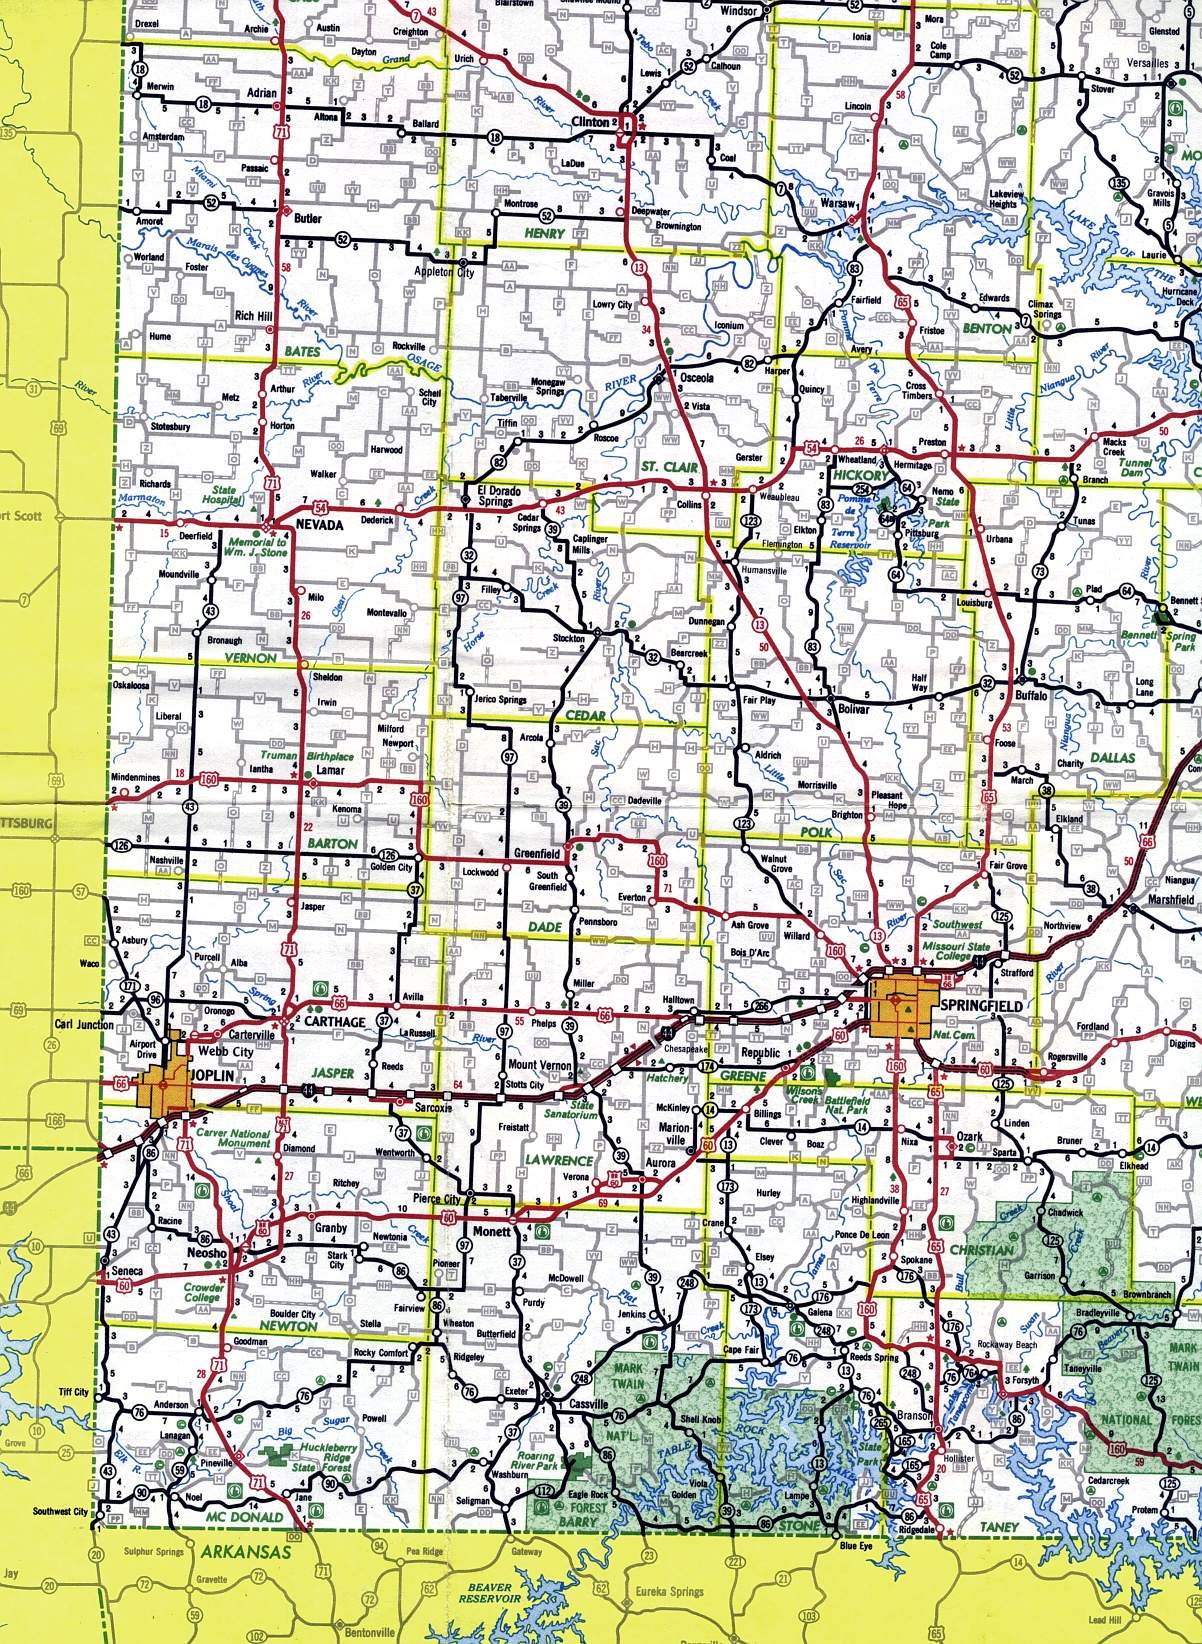 Southwest corner of Missouri from 1969 official highway map